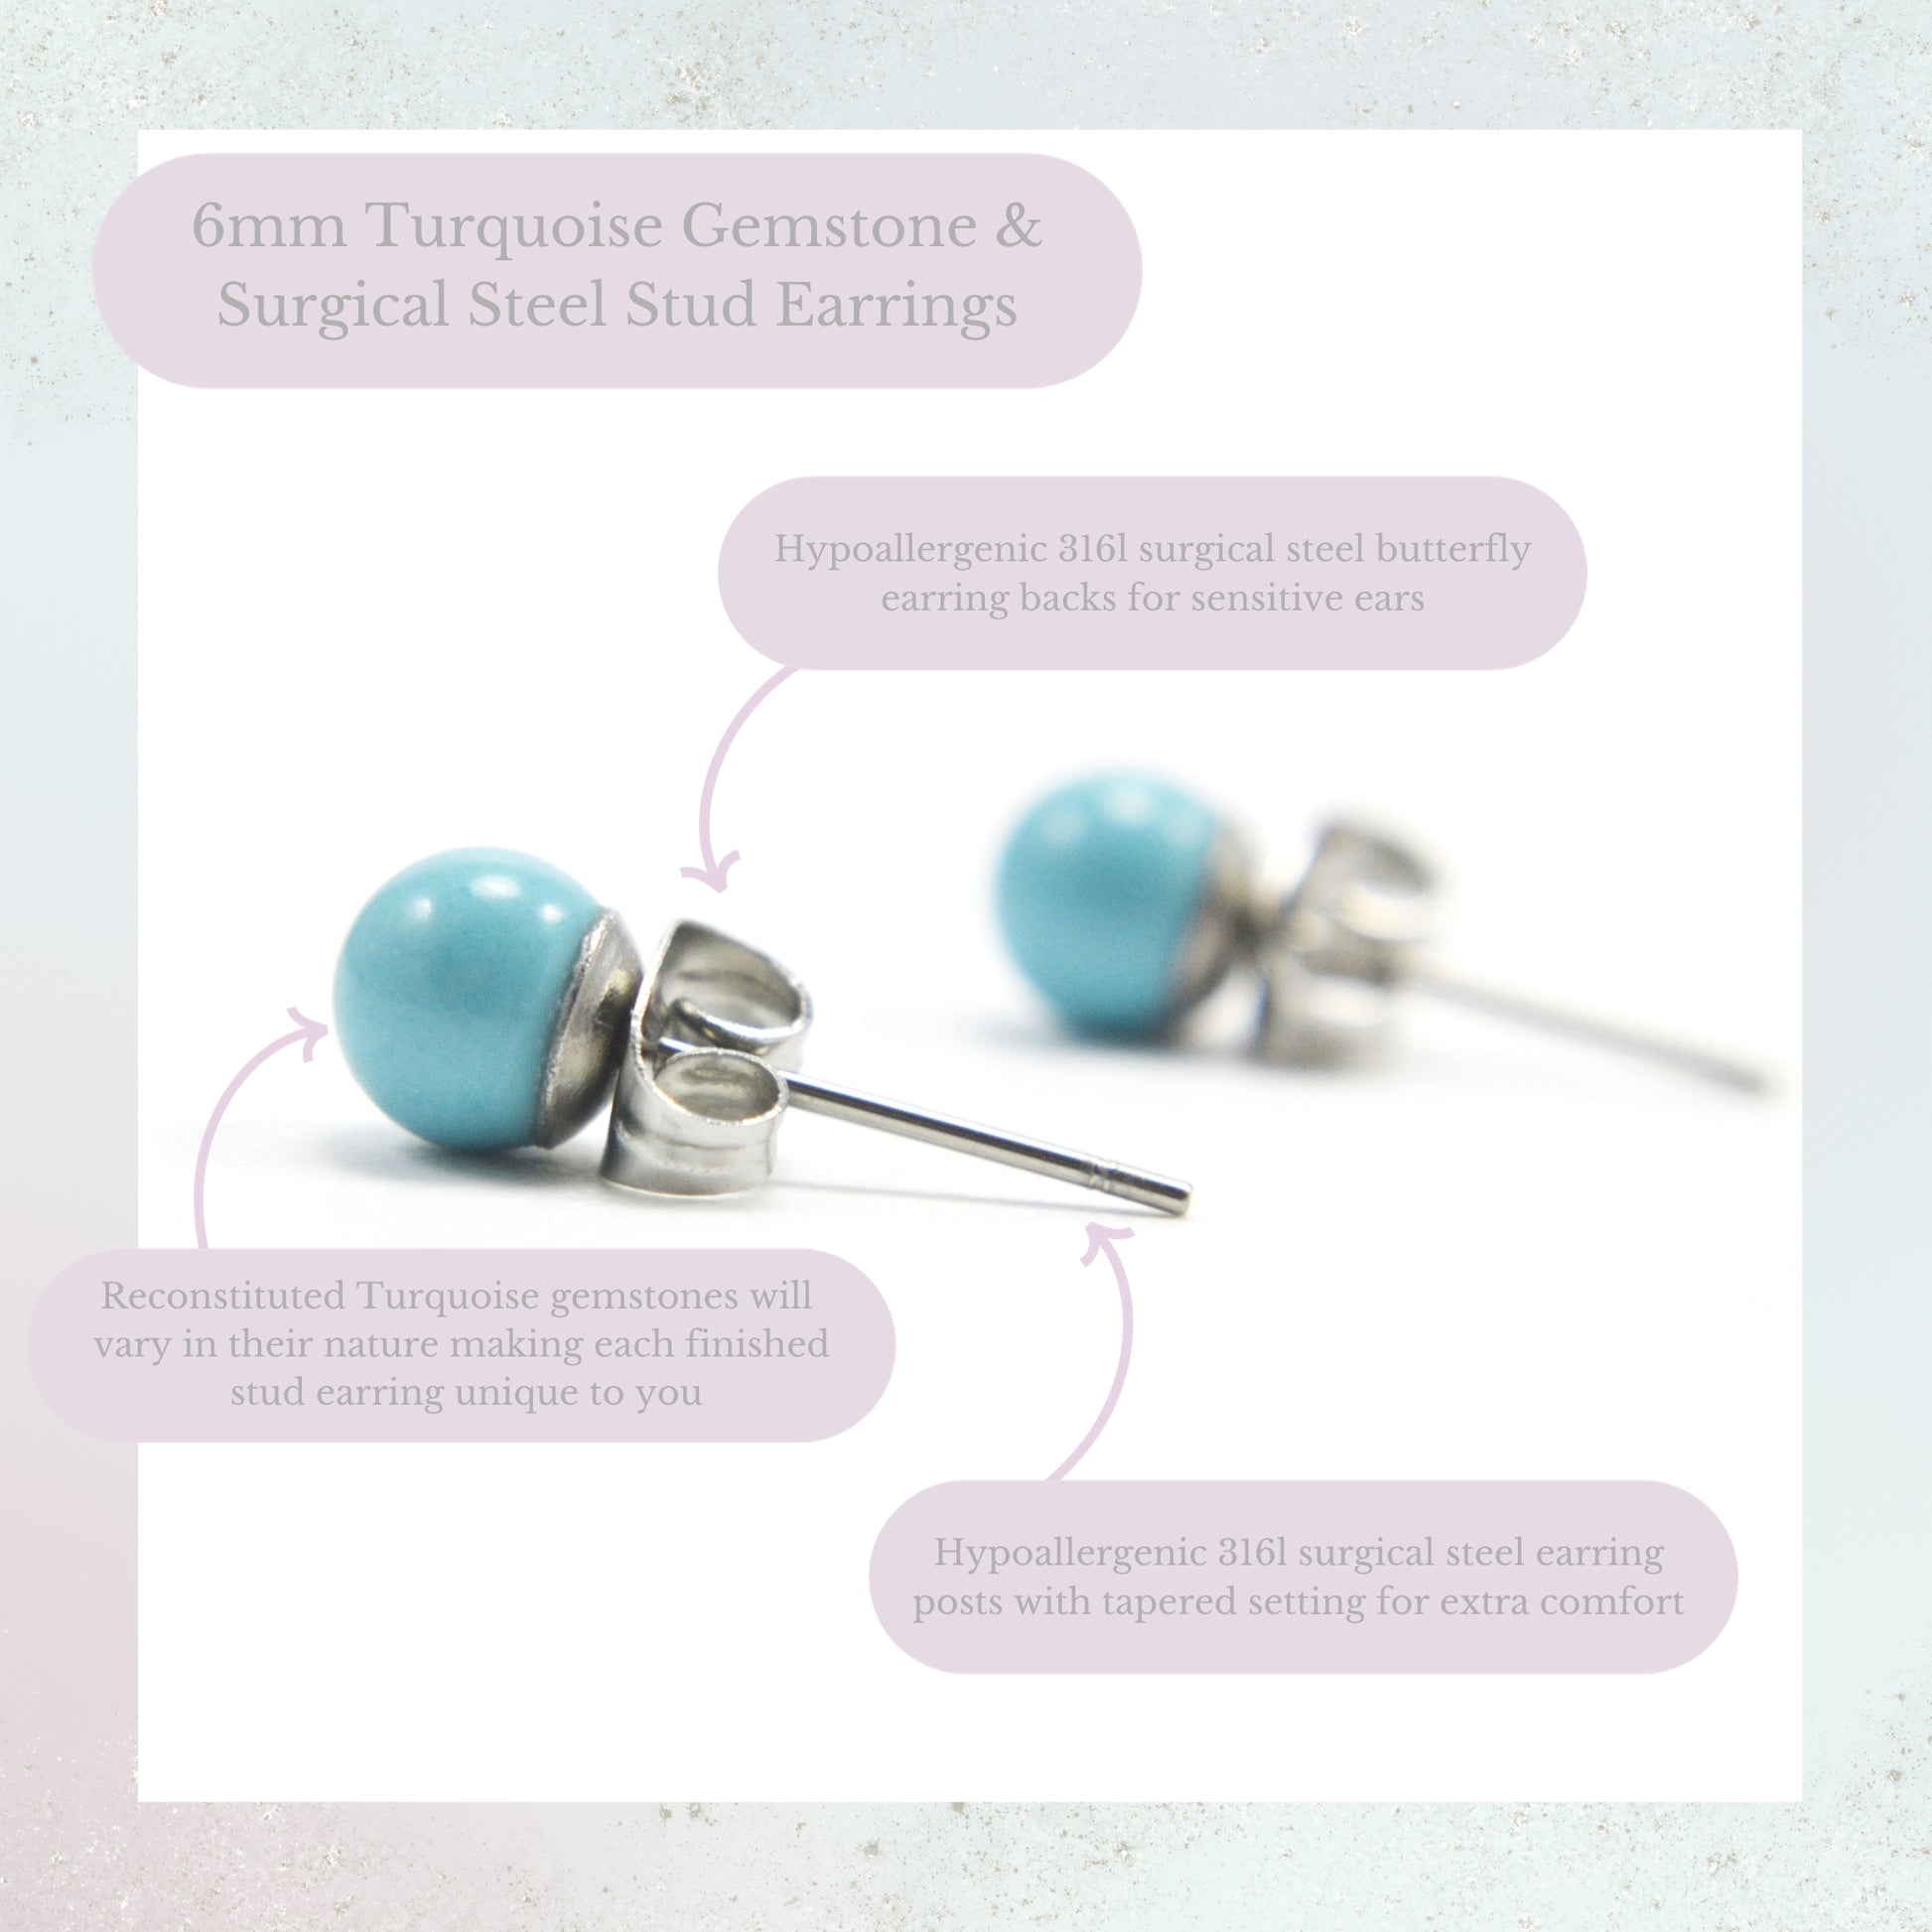 6mm Turquoise Gemstone & Surgical Steel Stud Earrings Product Information Graphic